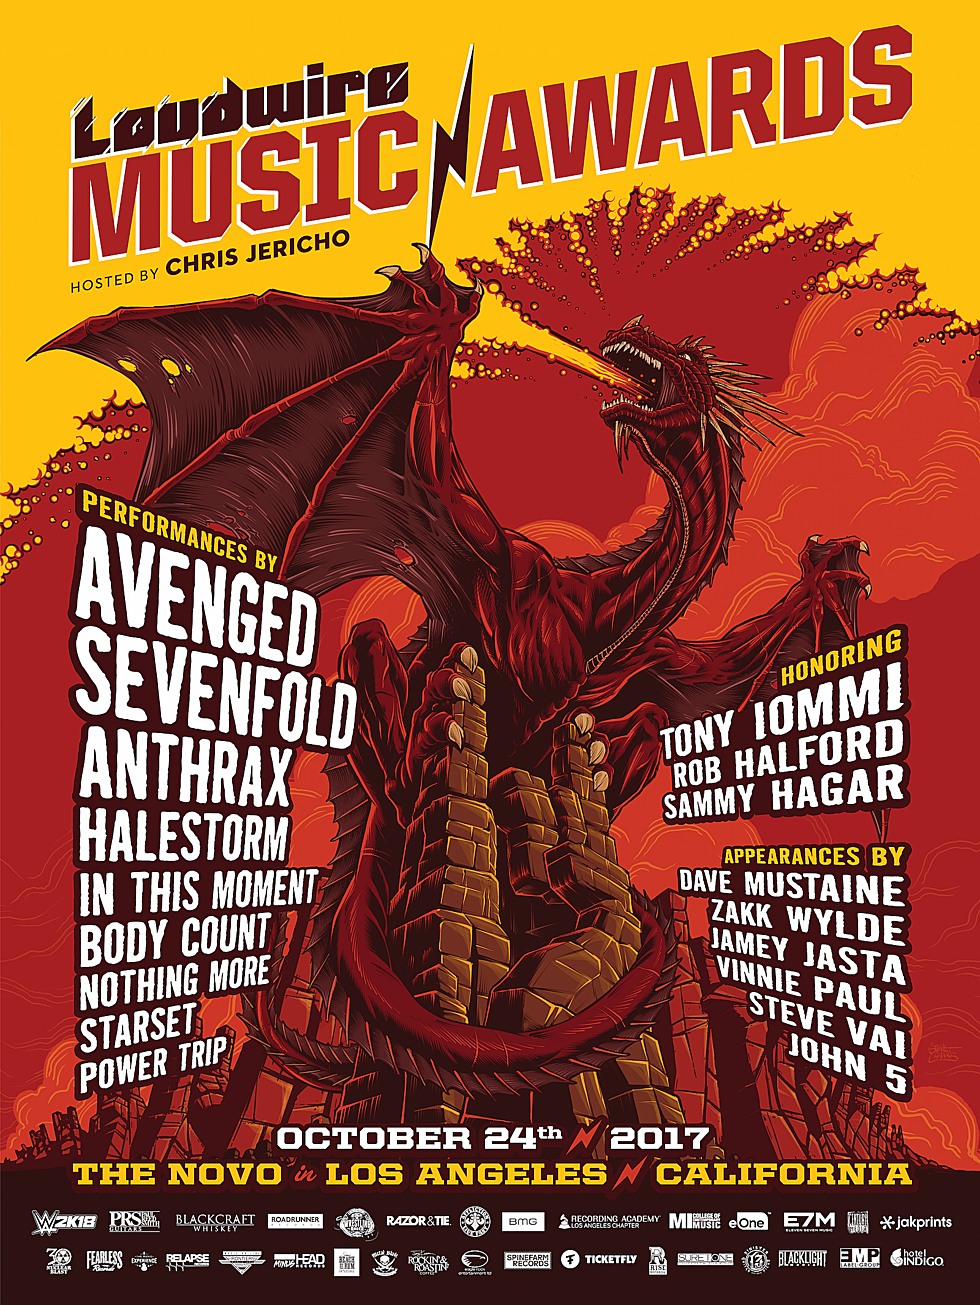 Avenged Sevenfold, Anthrax, Halestorm + More to Rock Loudwire Music Awards – Get Tickets!